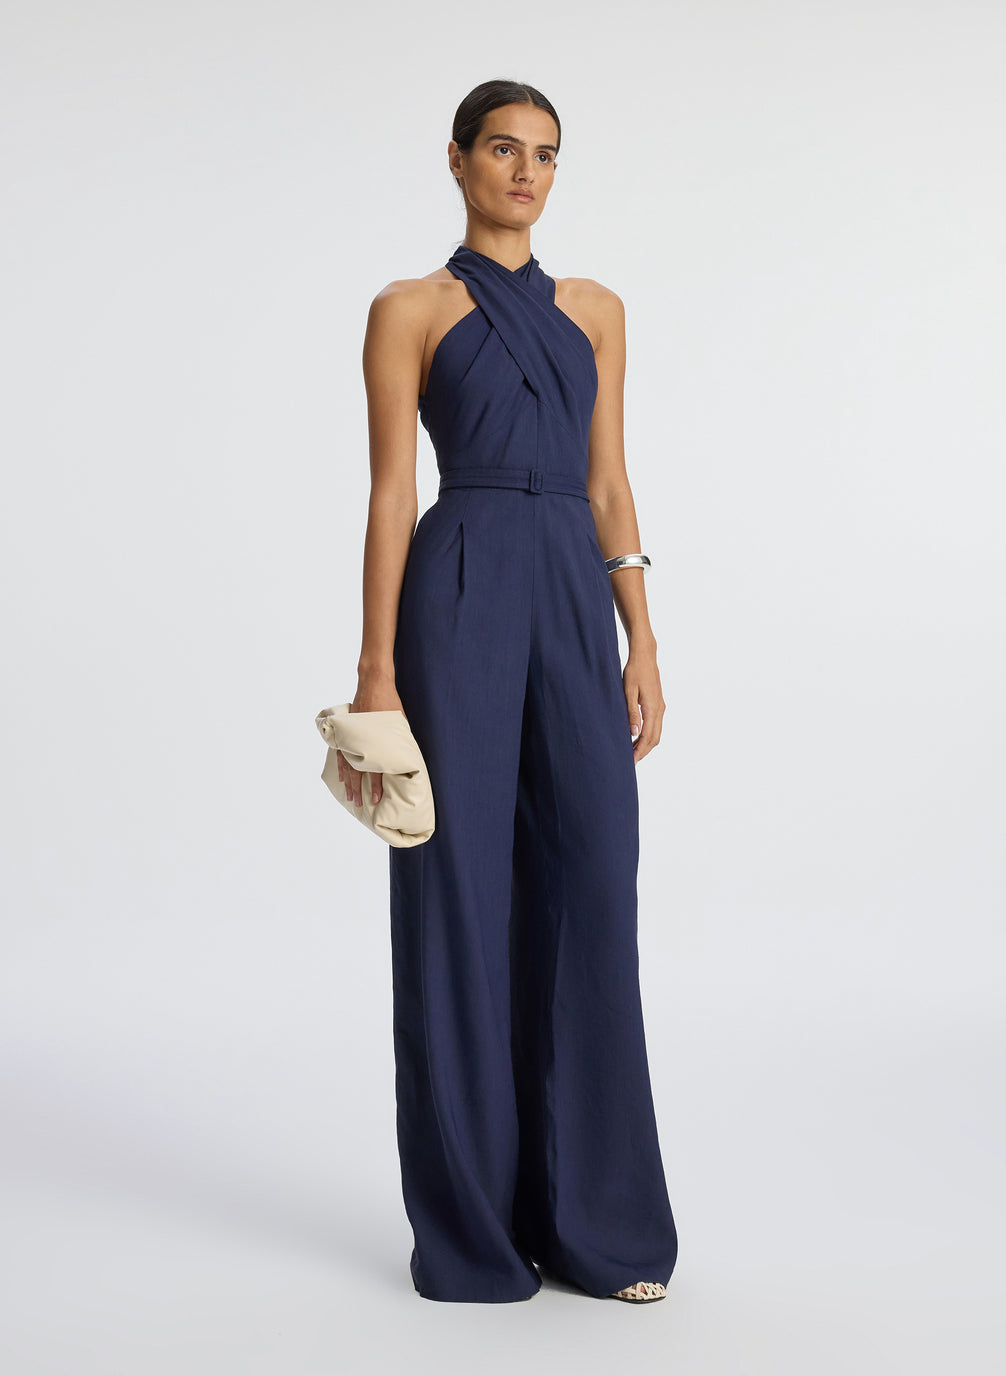 side view of woman wearing navy blue sleeveless jumpsuit